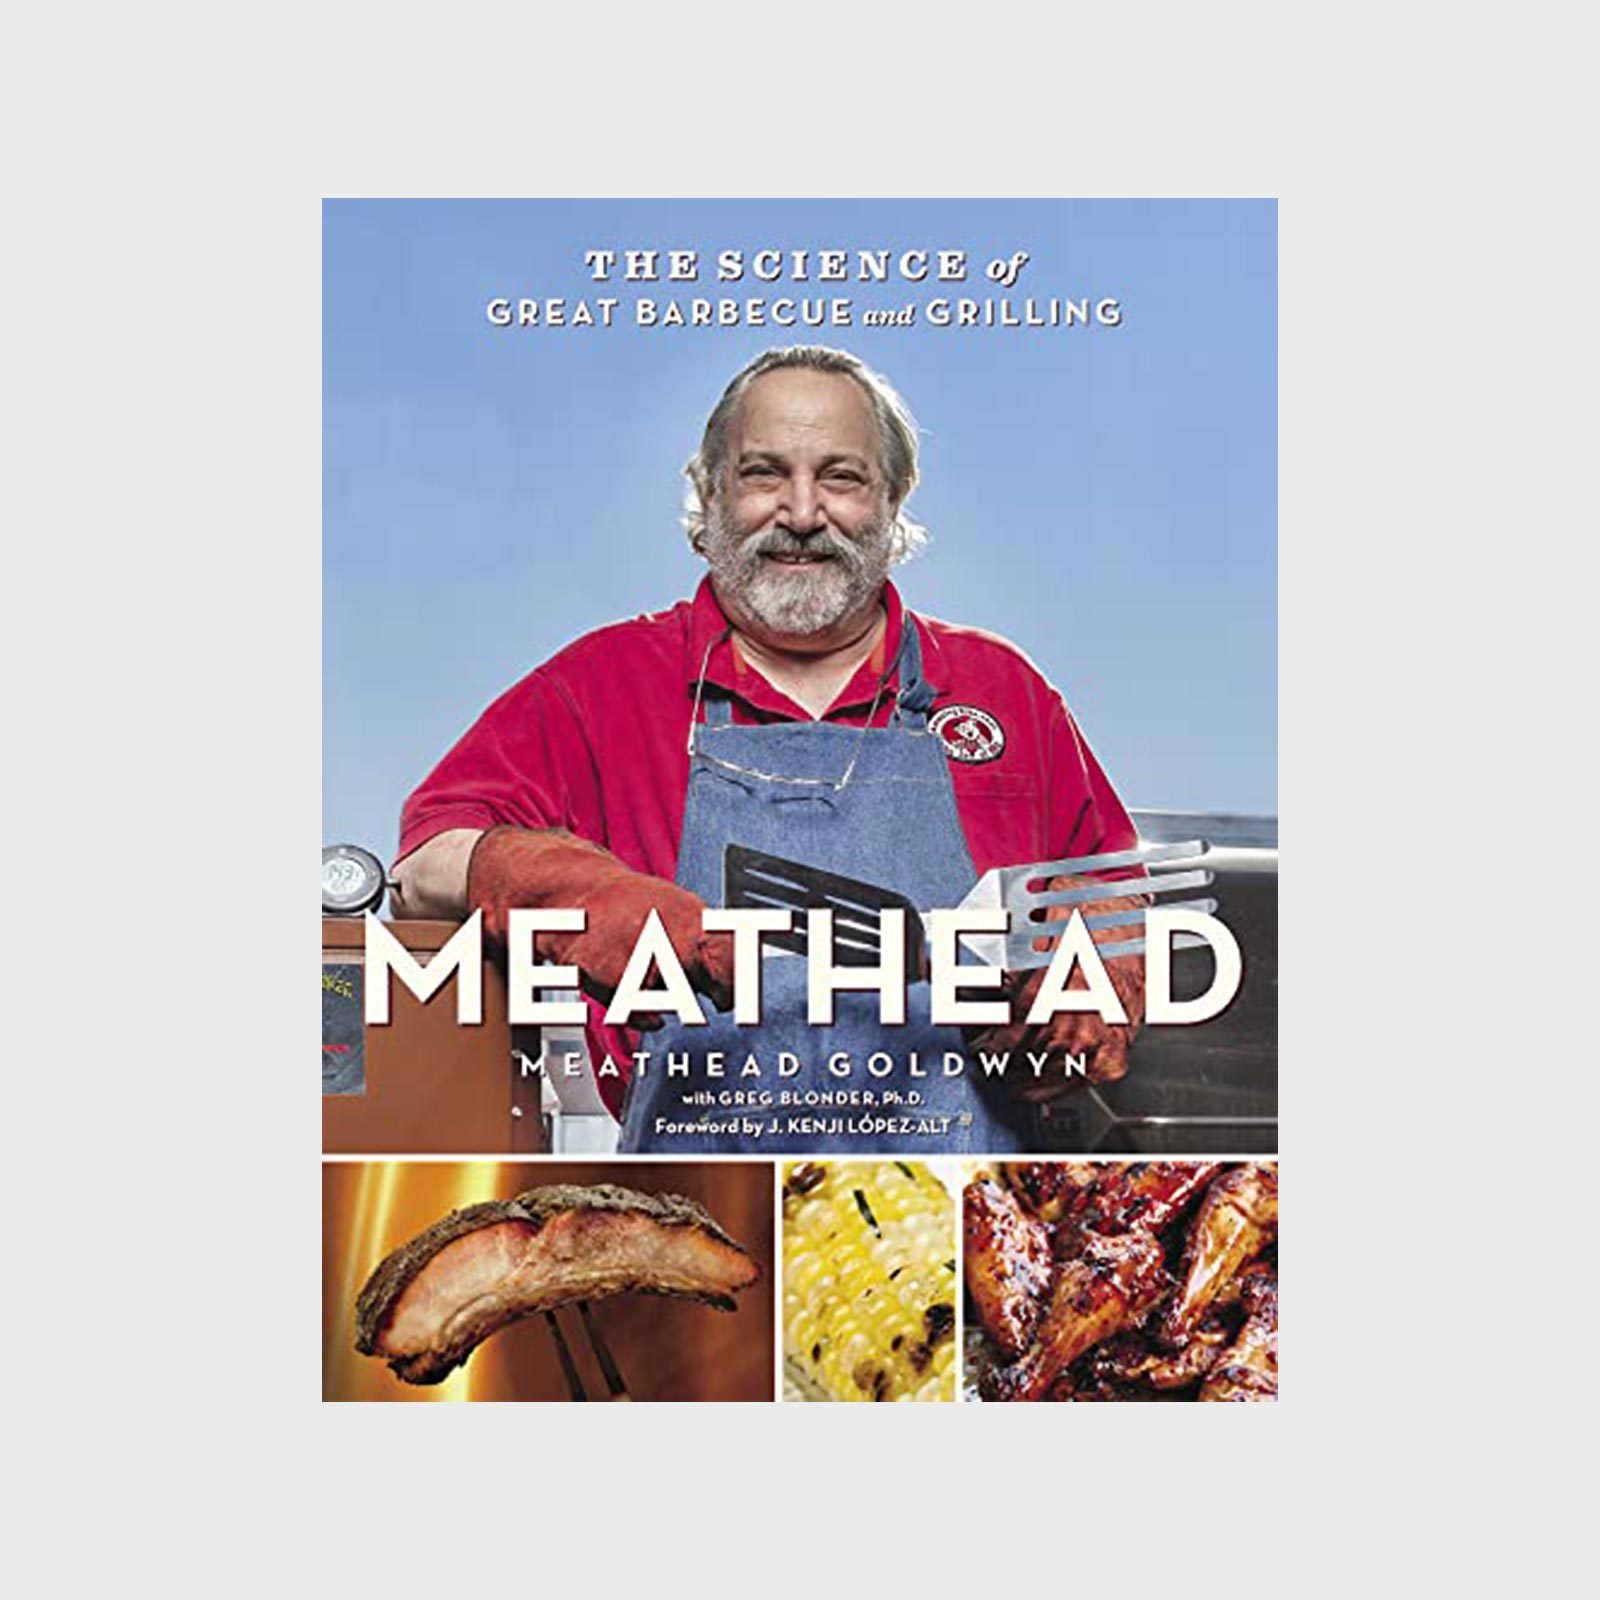 Fhm Ecomm Meathead The Science Of Great Barbecue And Grilling Via Barnsandnoble.com